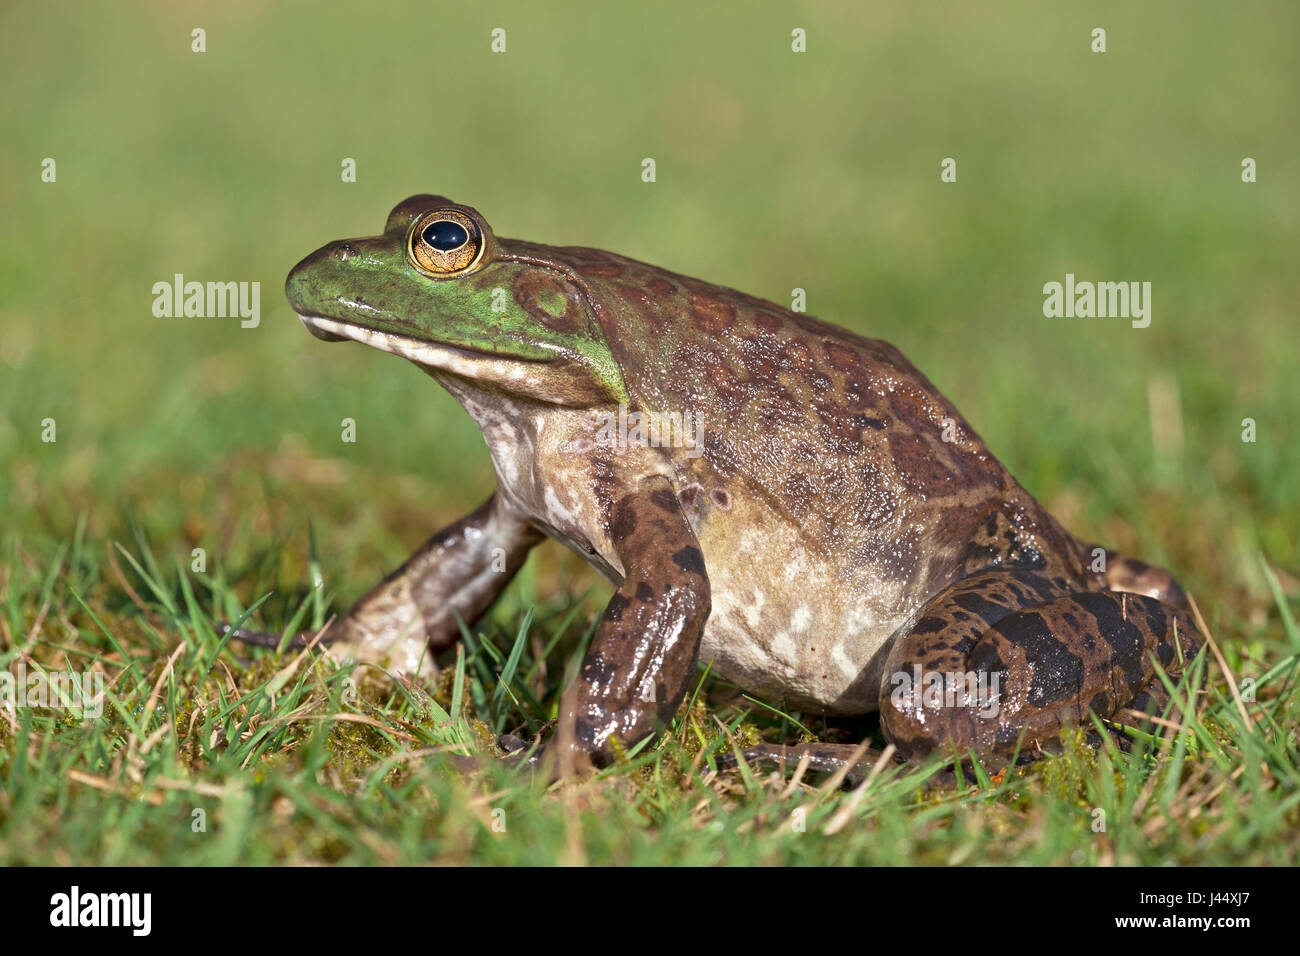 photo of a North American bullfrog on grass Stock Photo